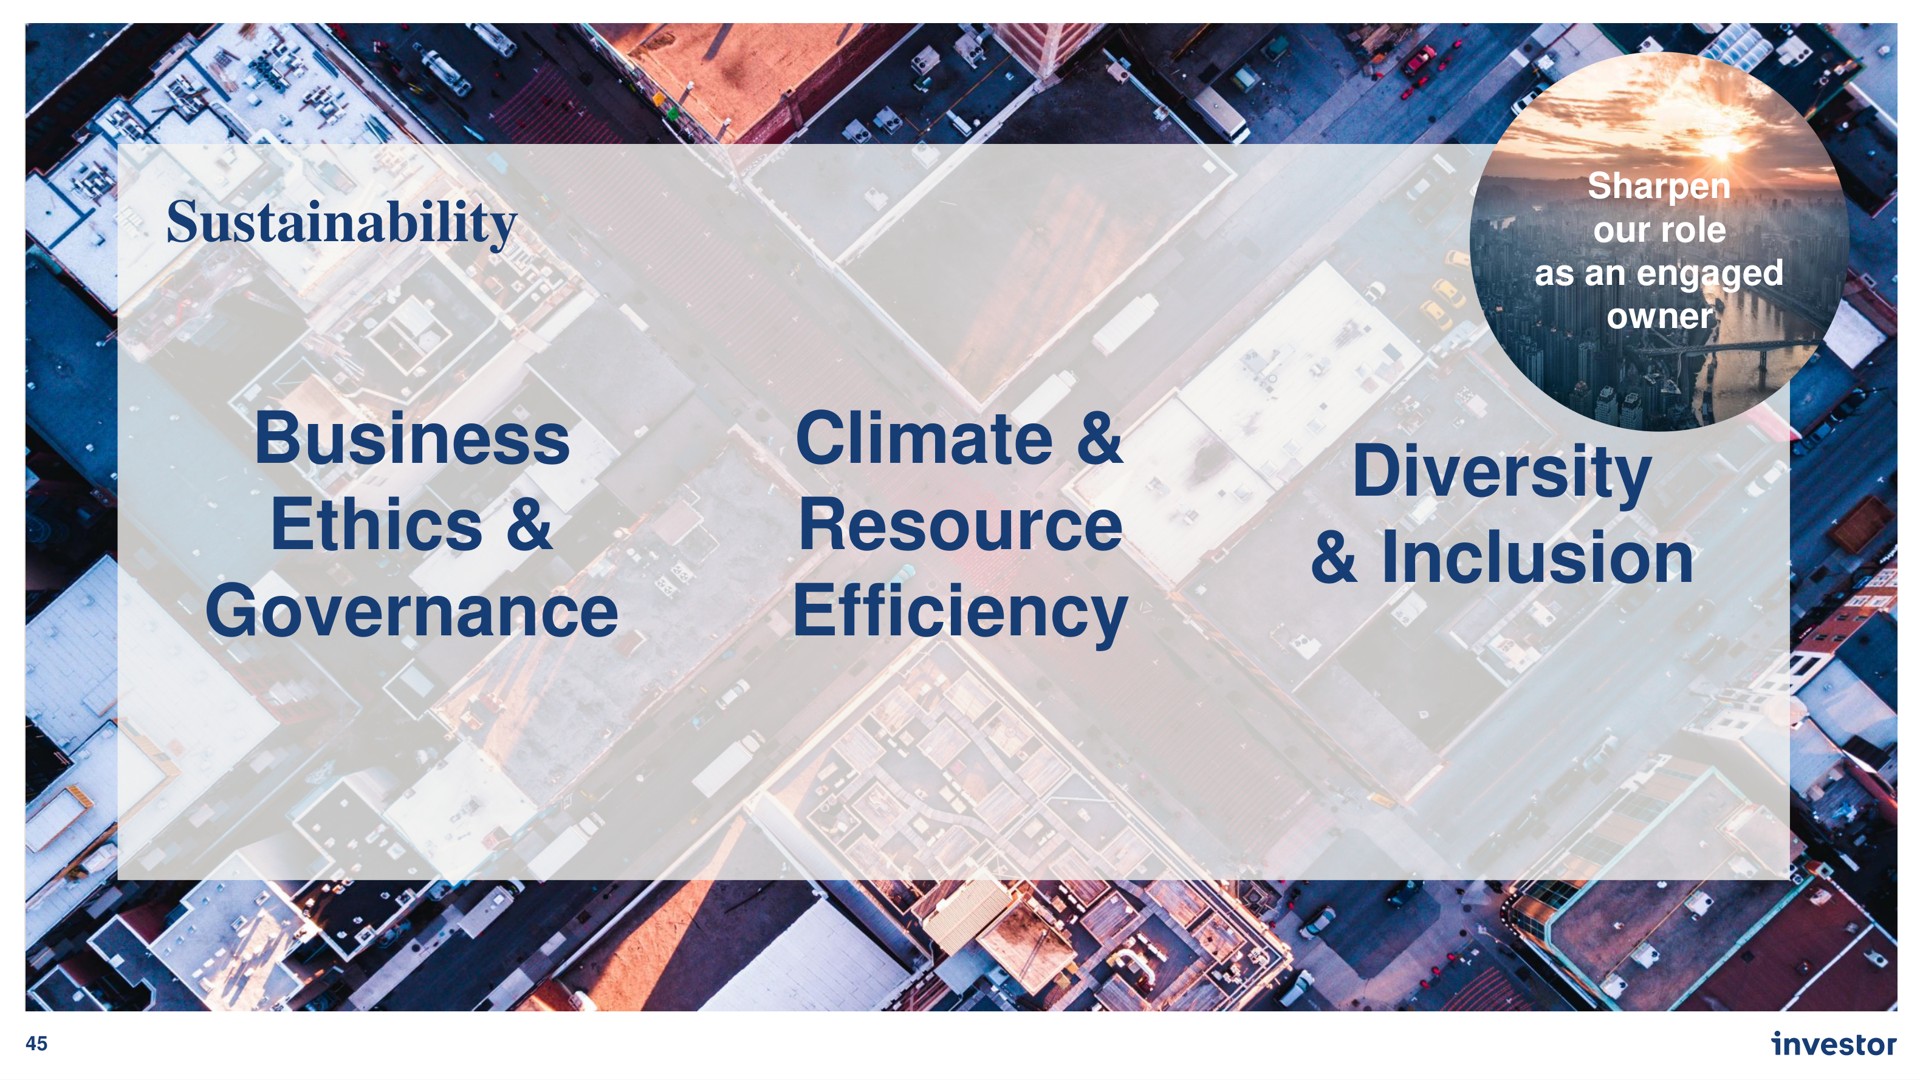 business ethics governance climate resource efficiency diversity inclusion a | Investor AB